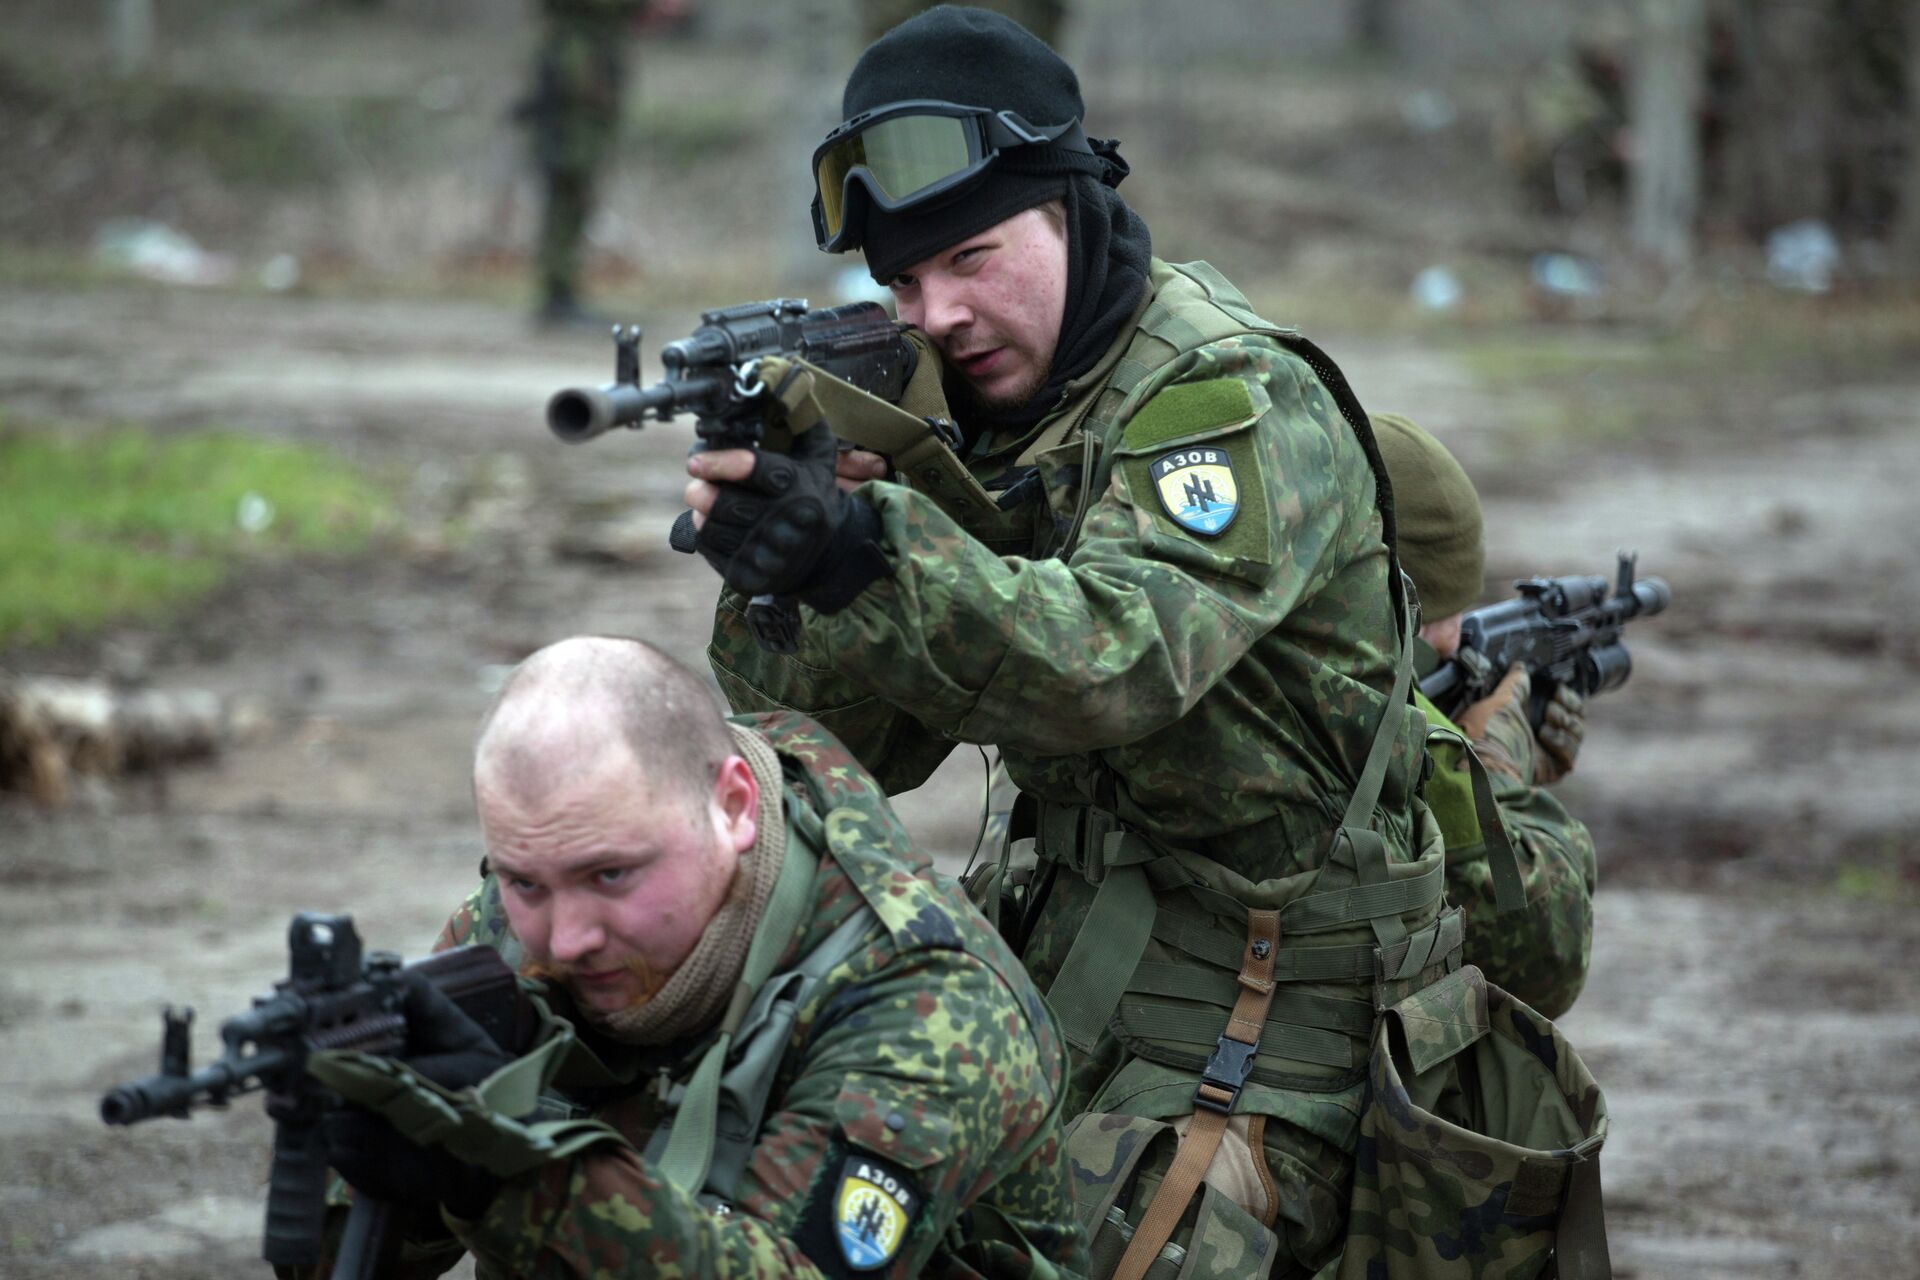 Fighters of the Azov paramilitary battalion, a pro-Ukrainian volunteer armed group, take part in combat drills near the southern Ukrainian city of Mariupol on February 6, 2015 - Sputnik International, 1920, 19.05.2023